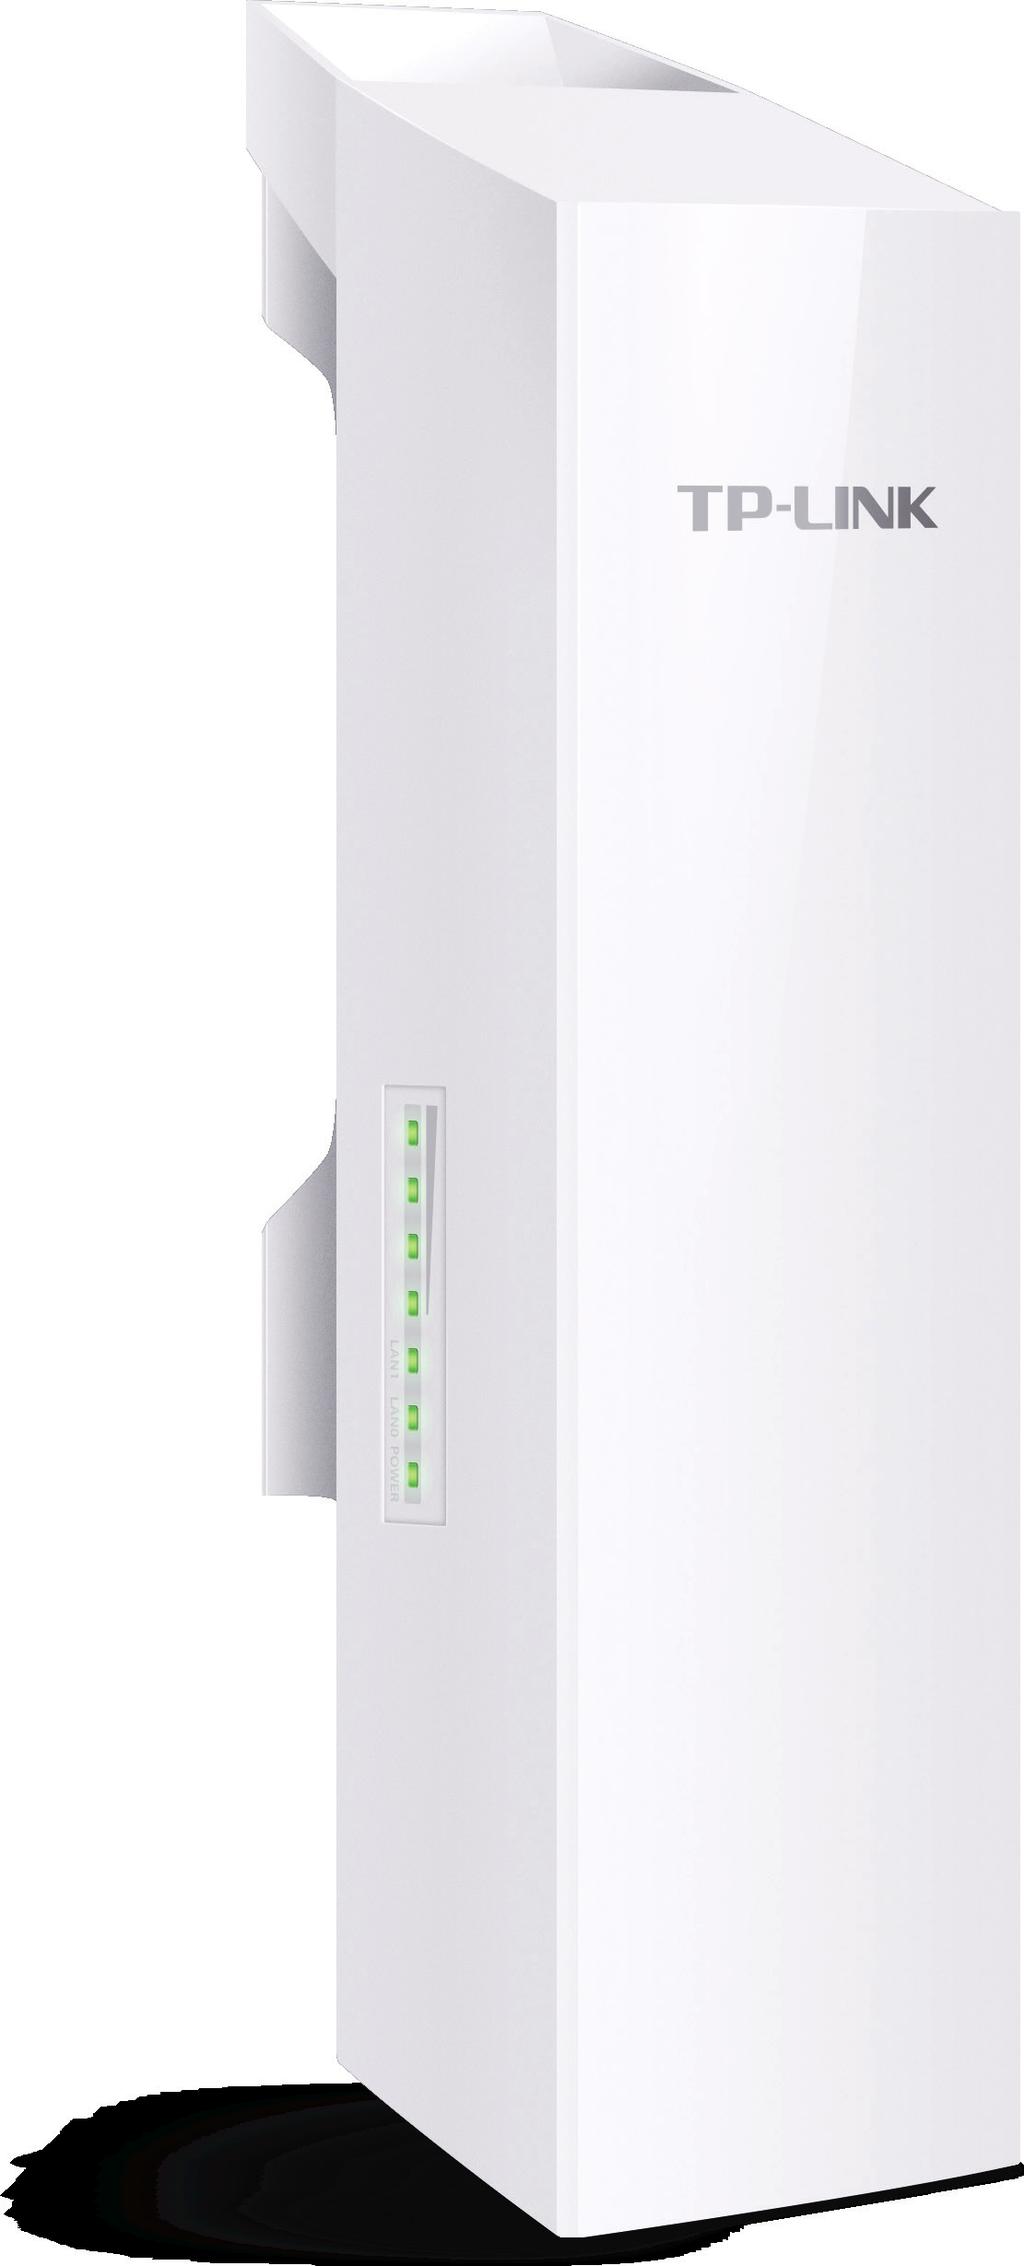 5GHz 300Mbps Highlights Wireless N speed up to 300Mbps Selectable bandwidth of 5/10/20/40MHz Adjustable transmission power by 1dBm Broad operating frequency channels ensure less wireless interference